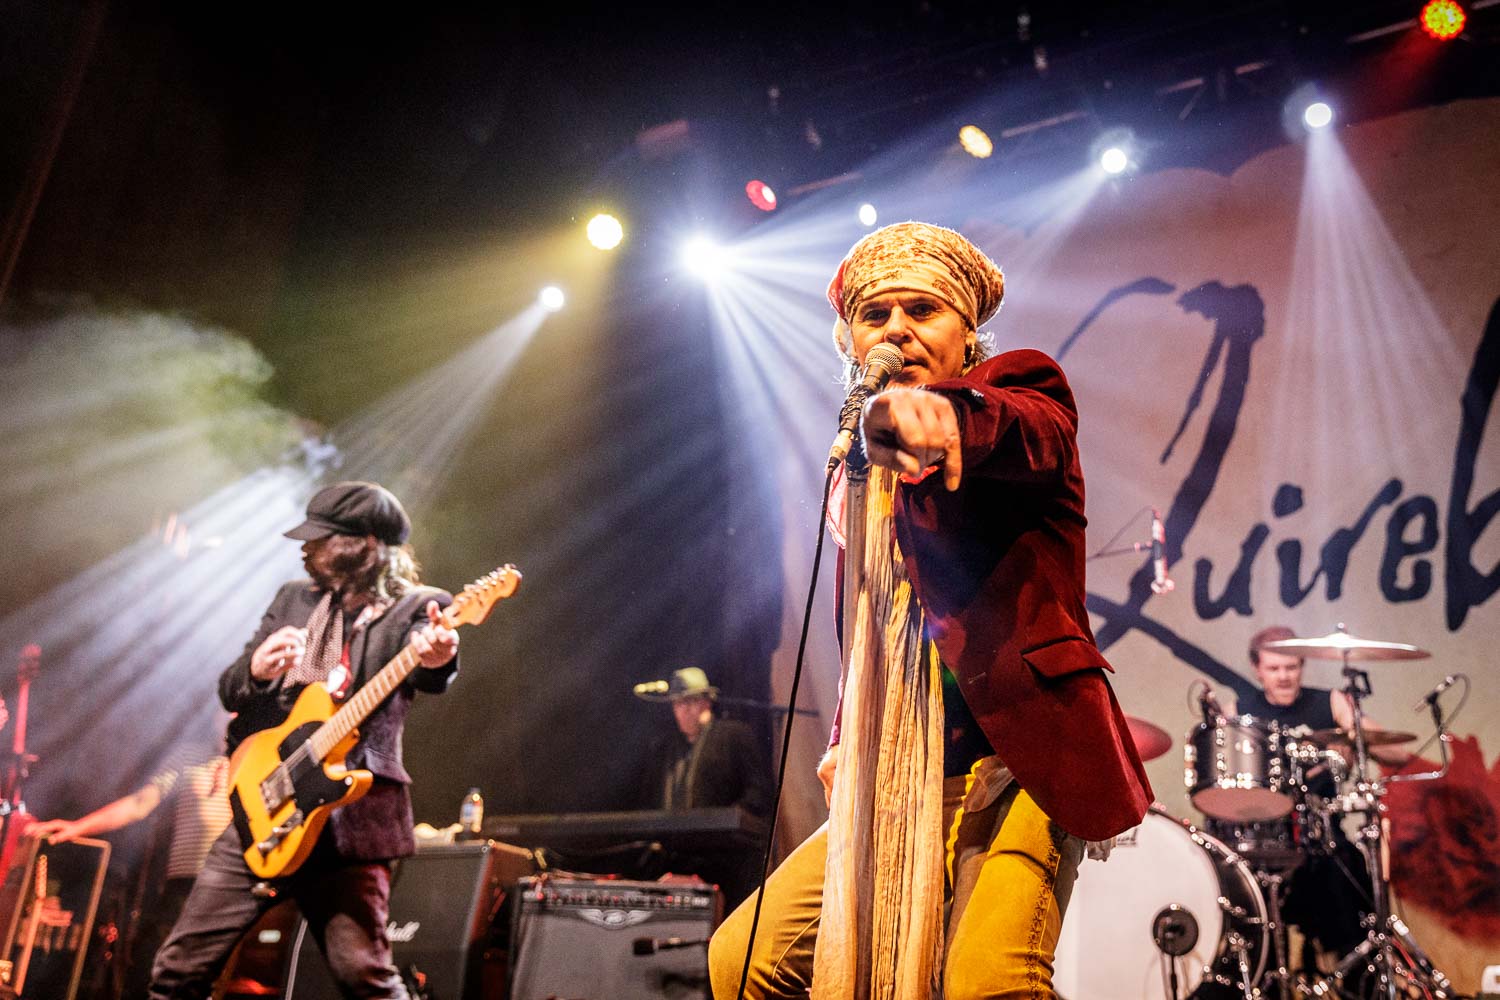 The Quireboys at O2 Ritz in Manchester on April 7th 2019. 